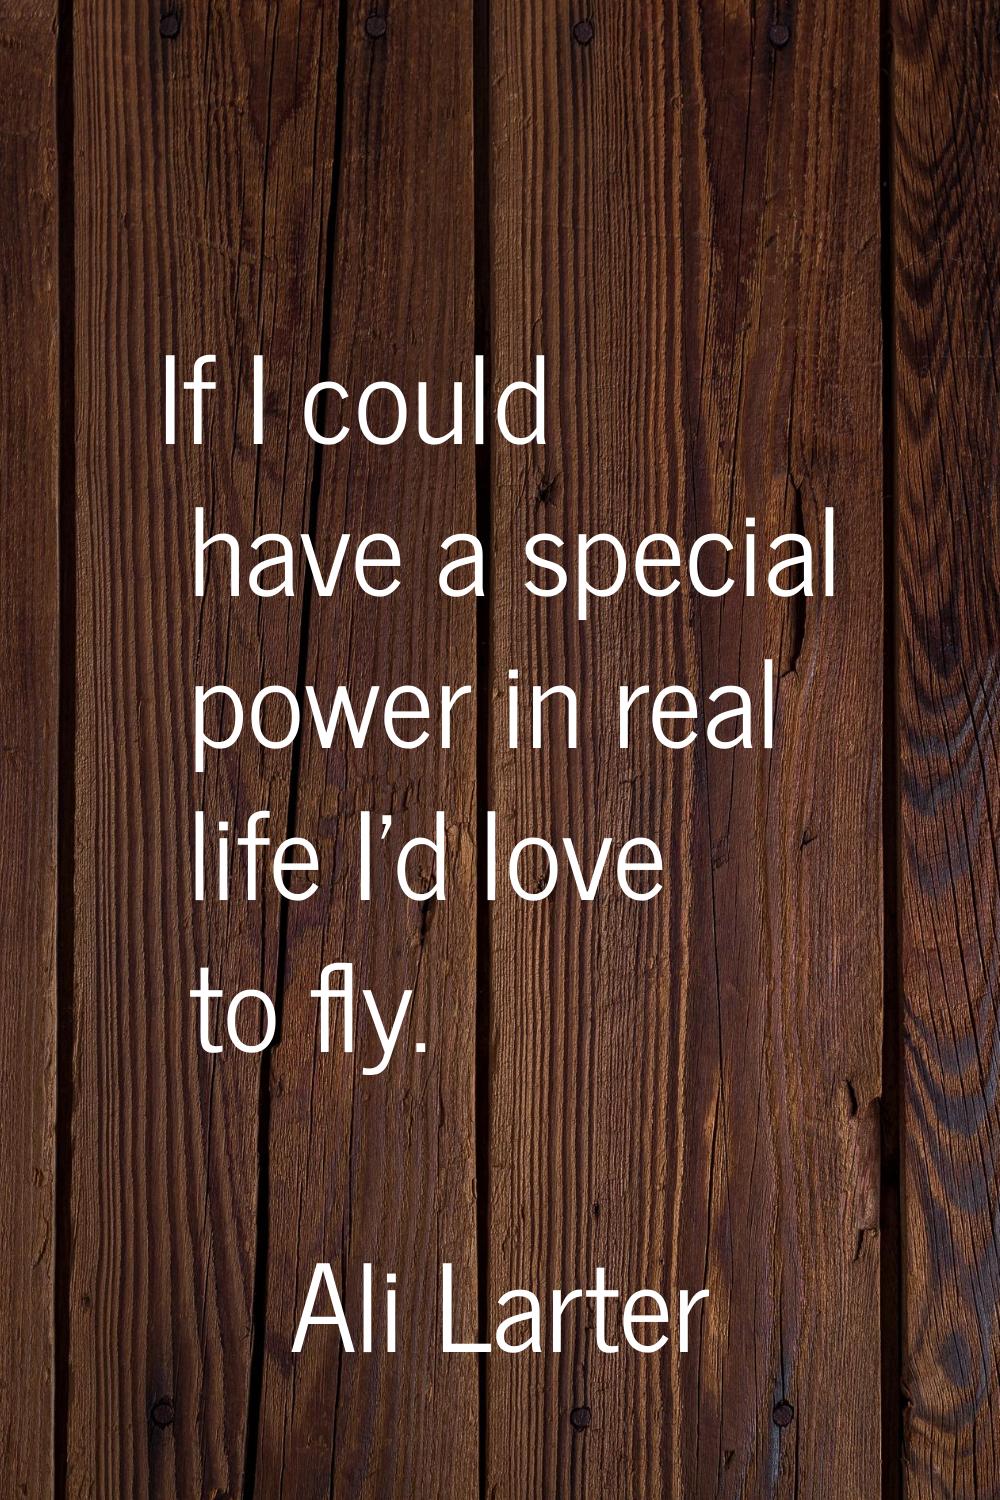 If I could have a special power in real life I'd love to fly.